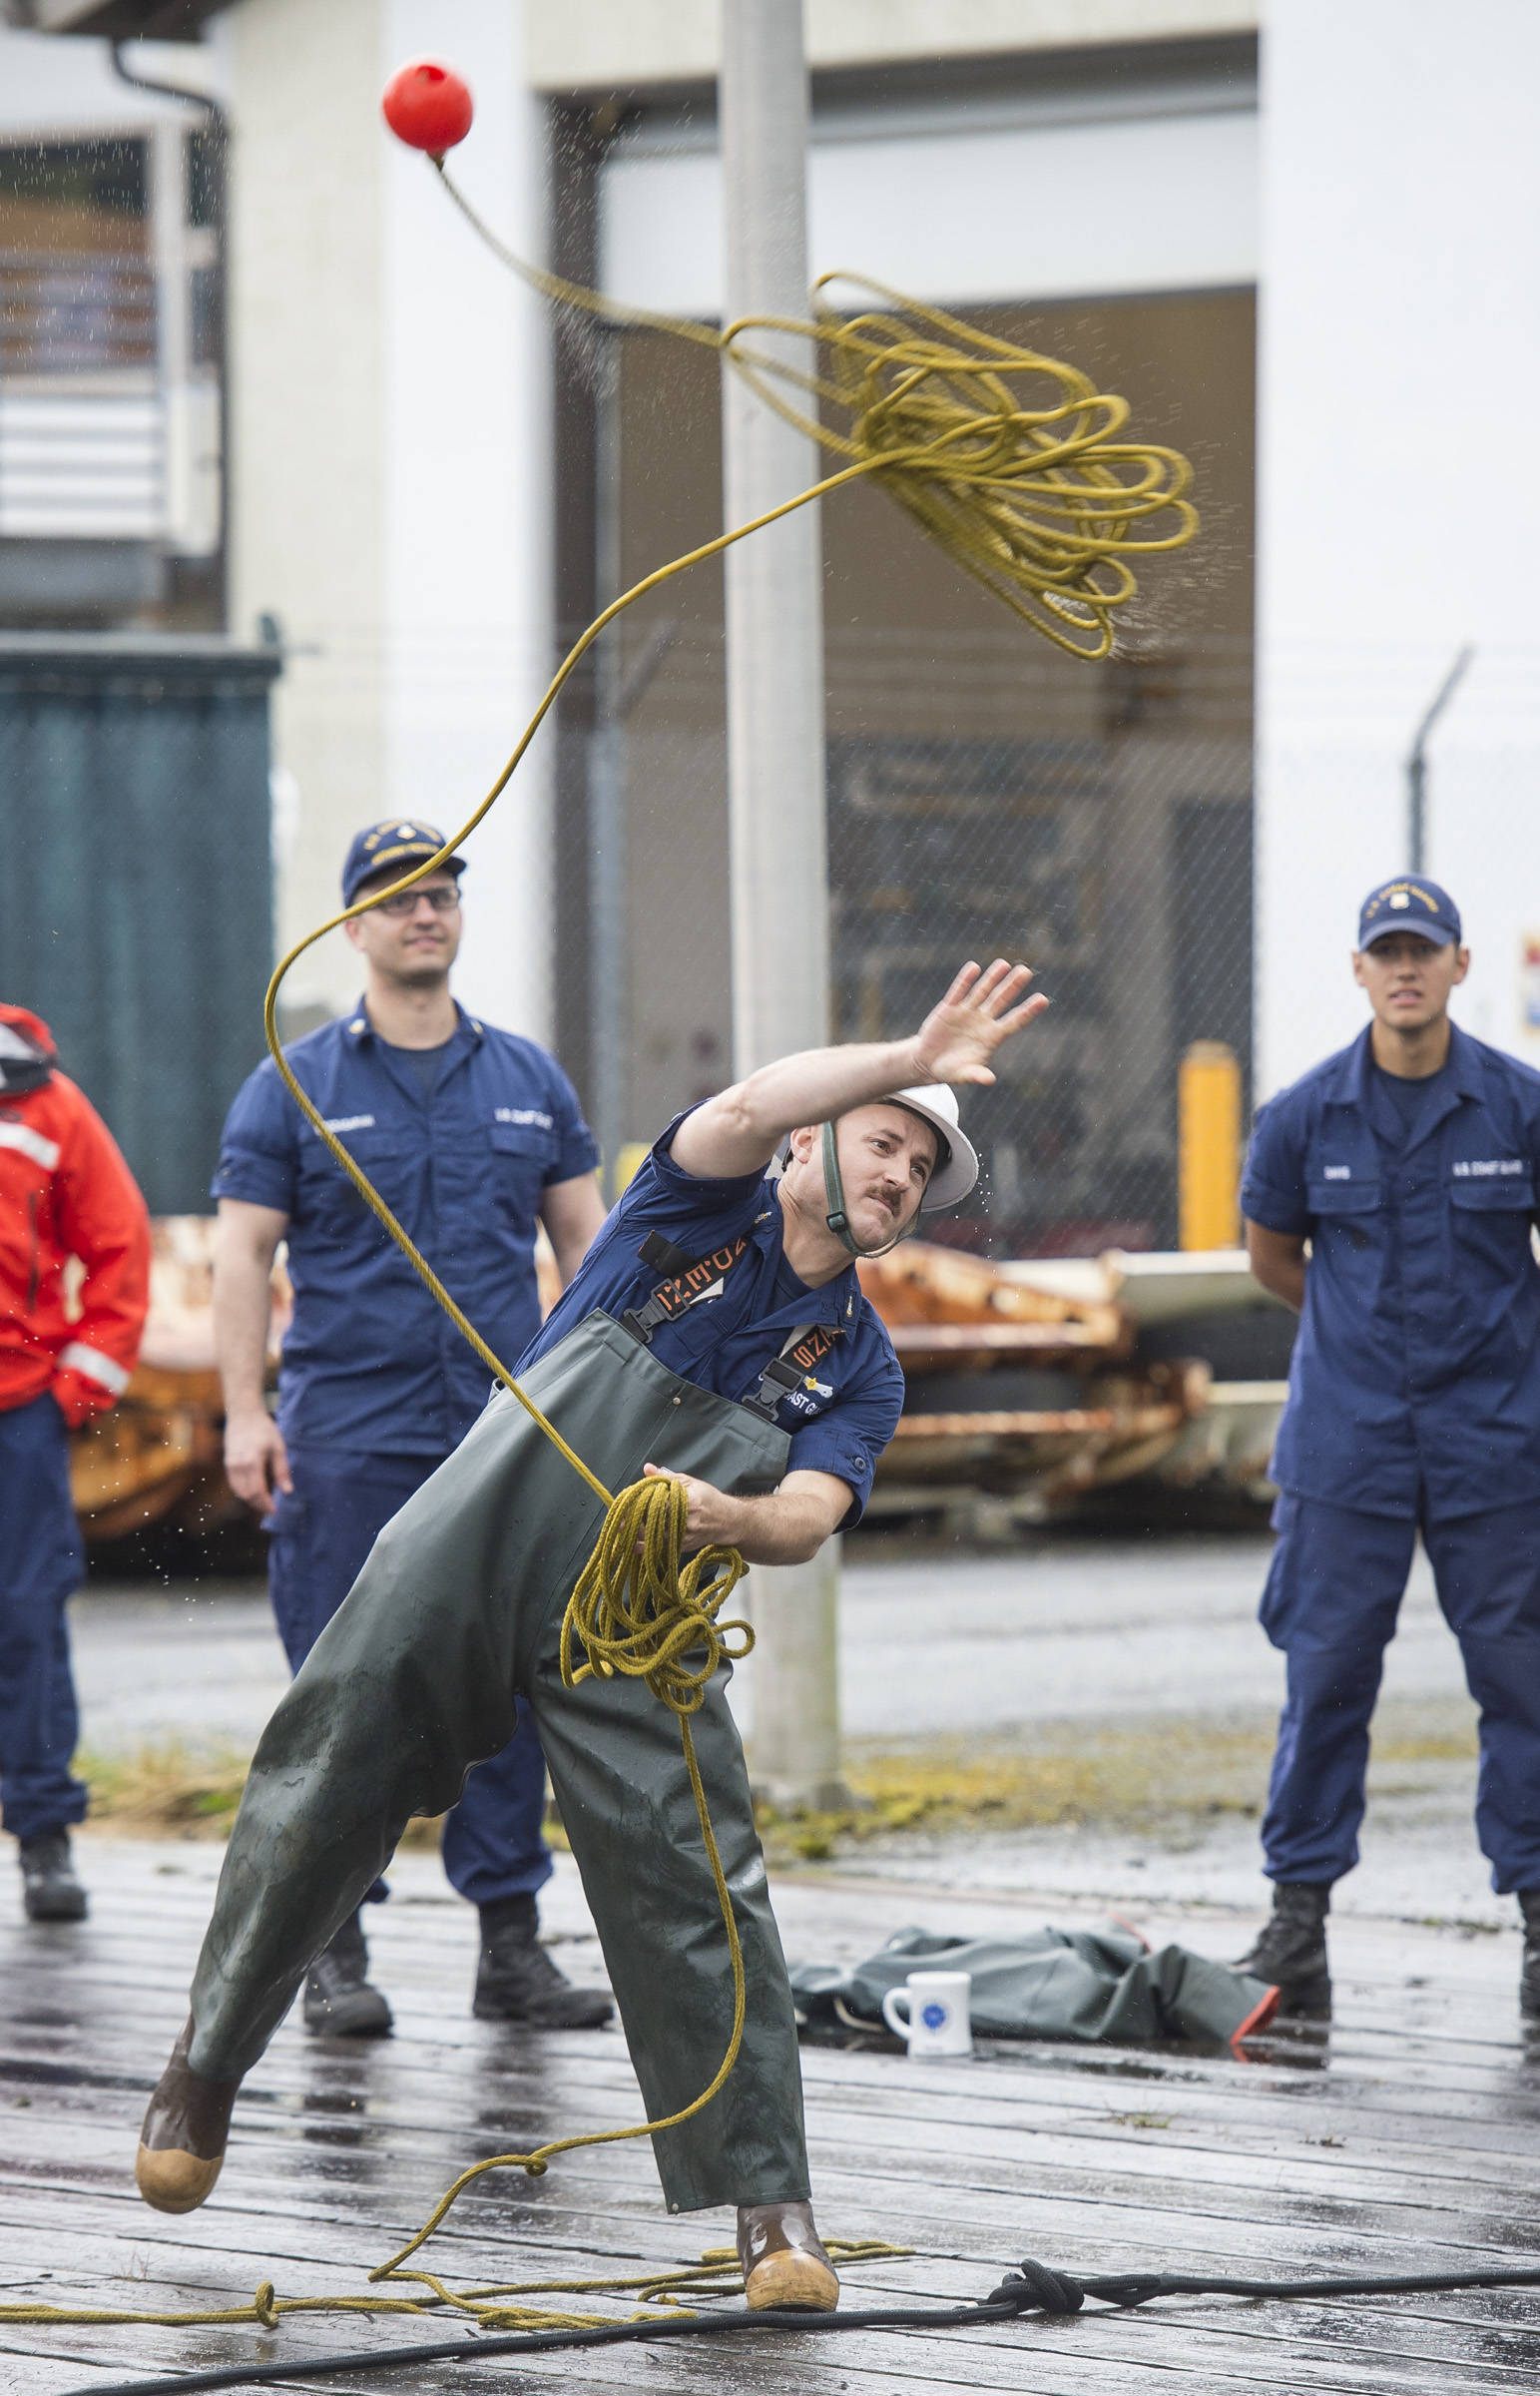 Senior Chief Petty Officer Joe Baxter, of the Anthony Petit, competes in the line toss during the Buoy Tender Olympics at Station Juneau on Wednesday, Aug. 22, 2018. (Michael Penn | Juneau Empire)